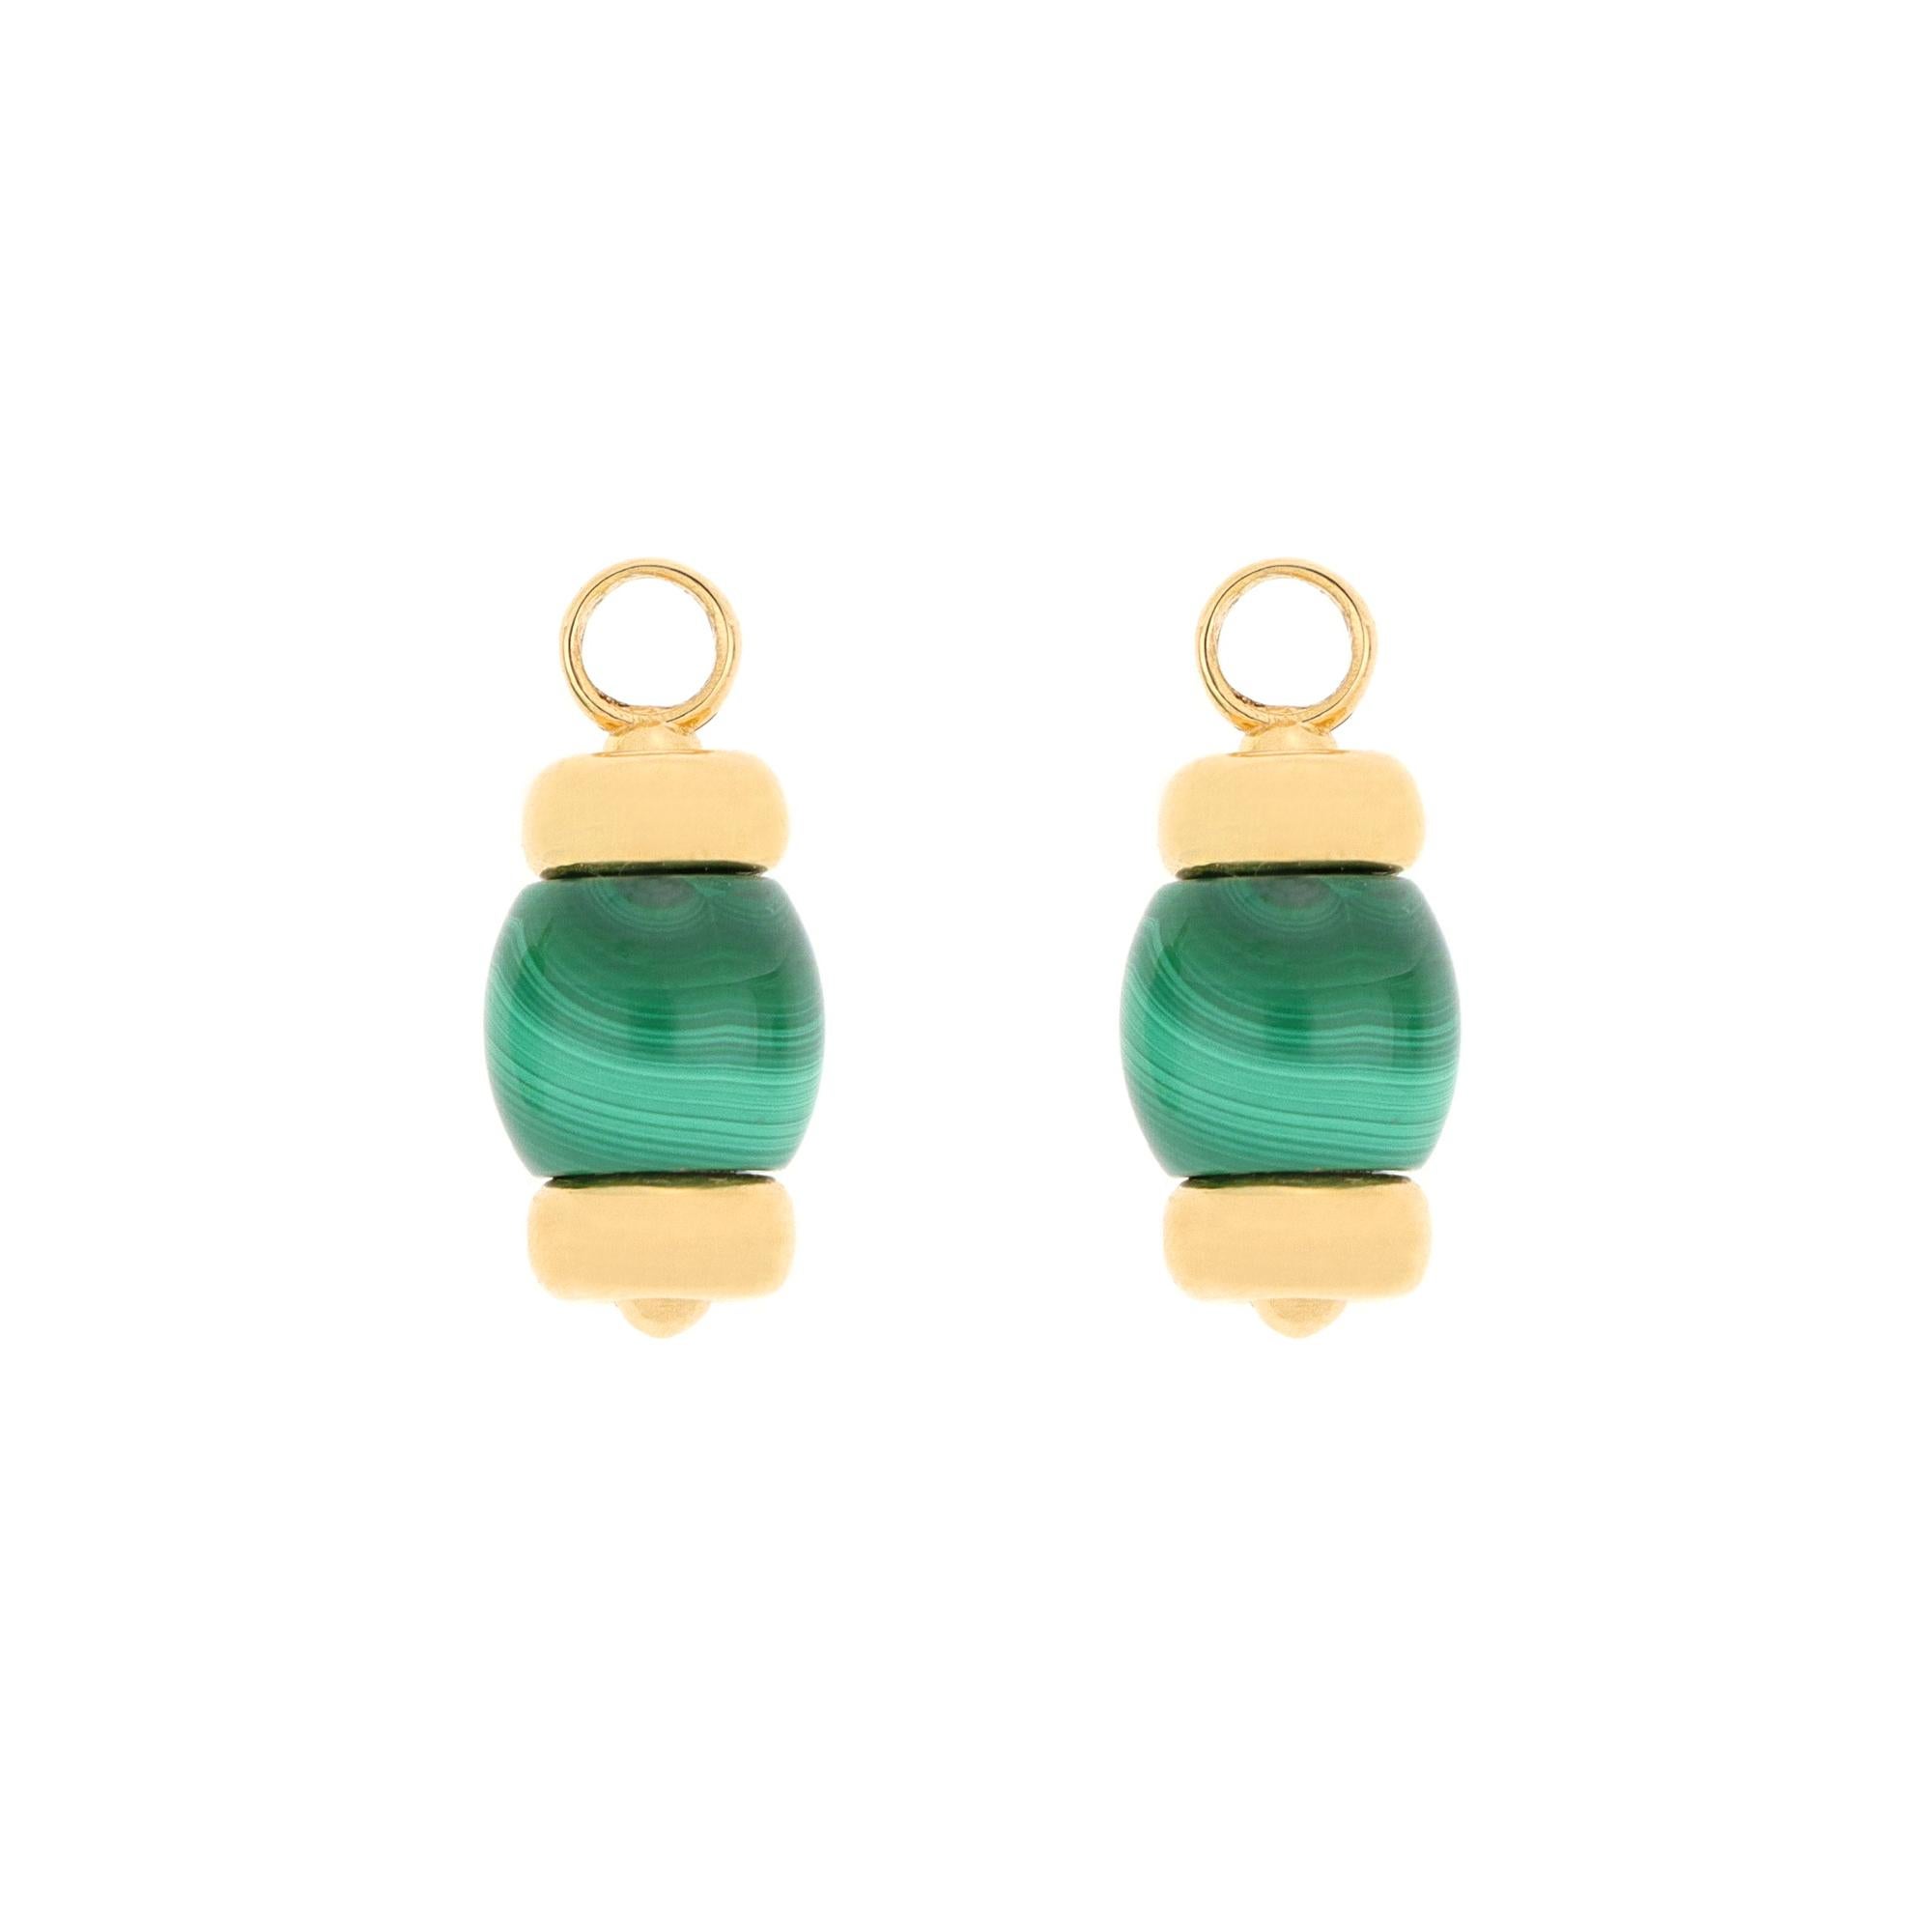 Audacity and creative flair come together in this 18-karat yellow gold earring set from Le Carrousel collection. The yellow gold pendant is enhanced by the deep green color of malachite. The particularity of this earring set lies in its versatility: